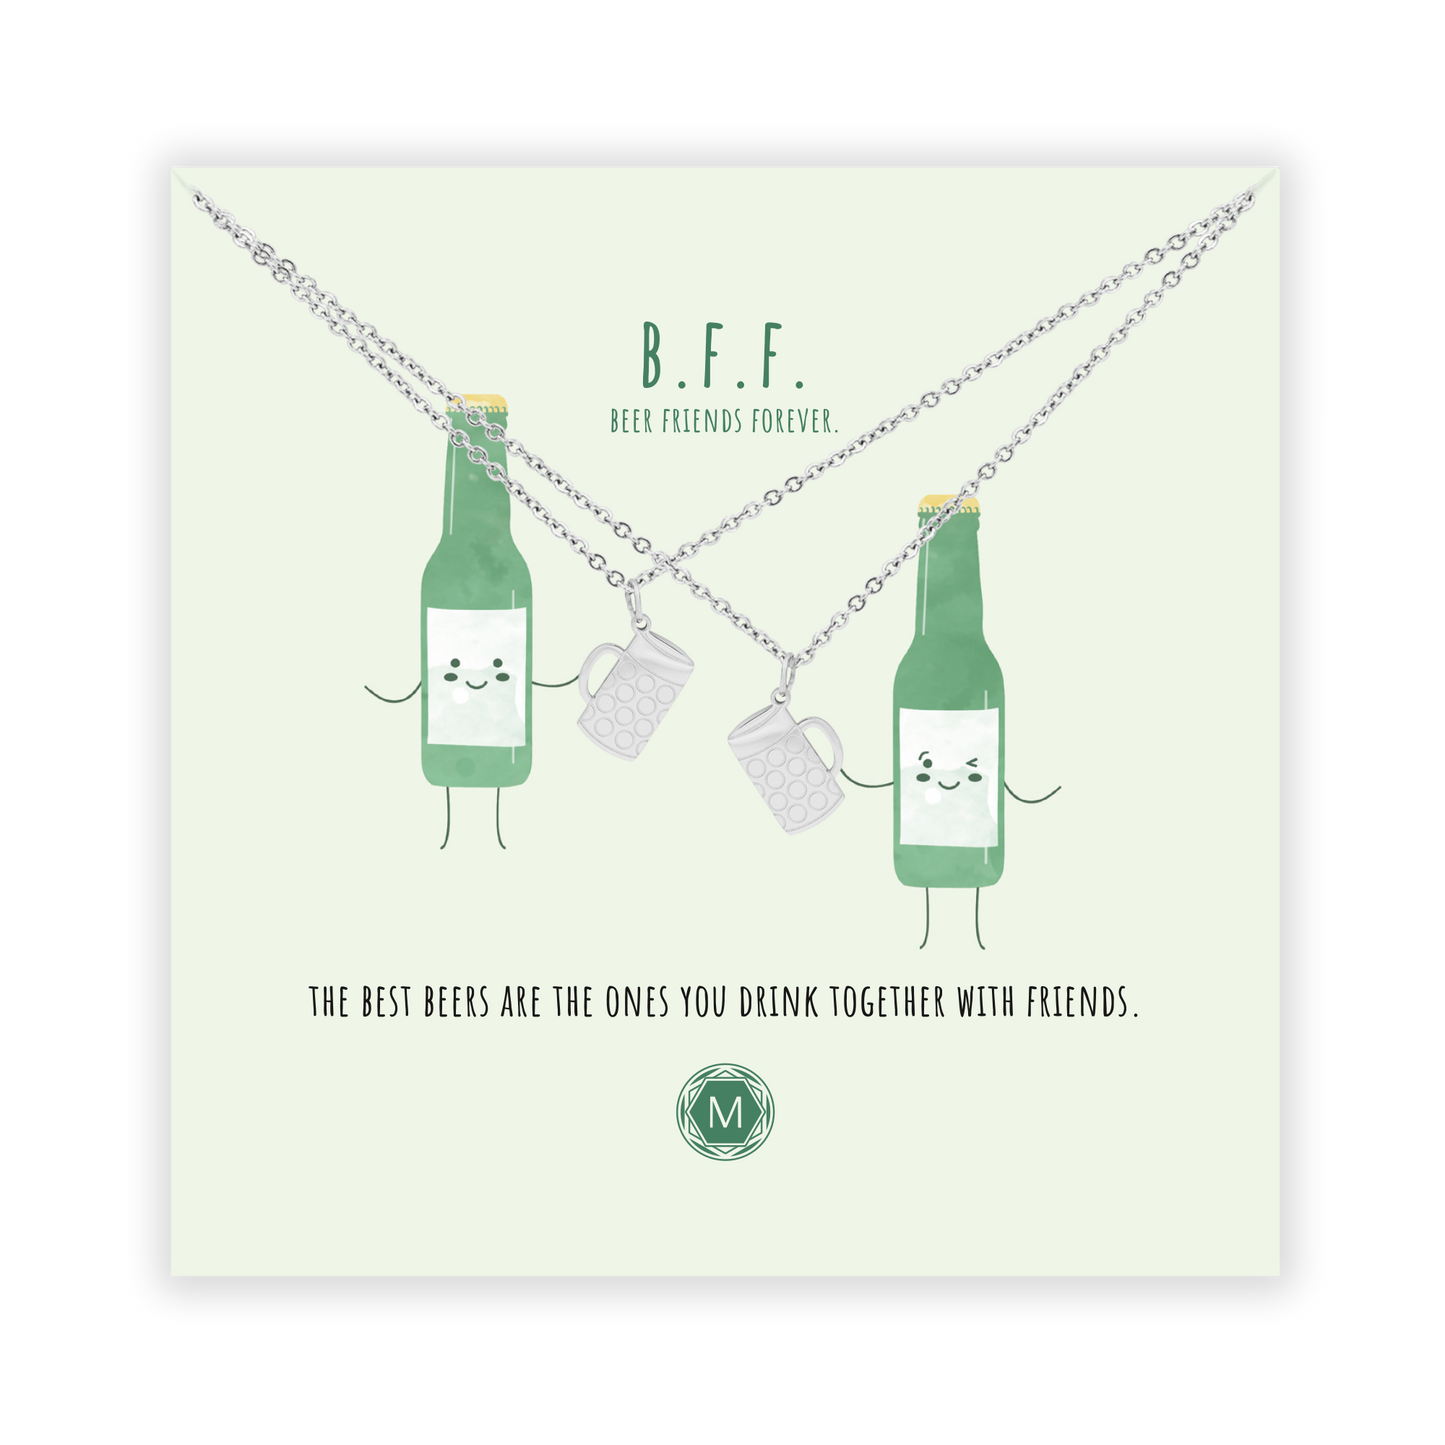 B.F.F. BEER FRIENDS FOREVER 2x Collier